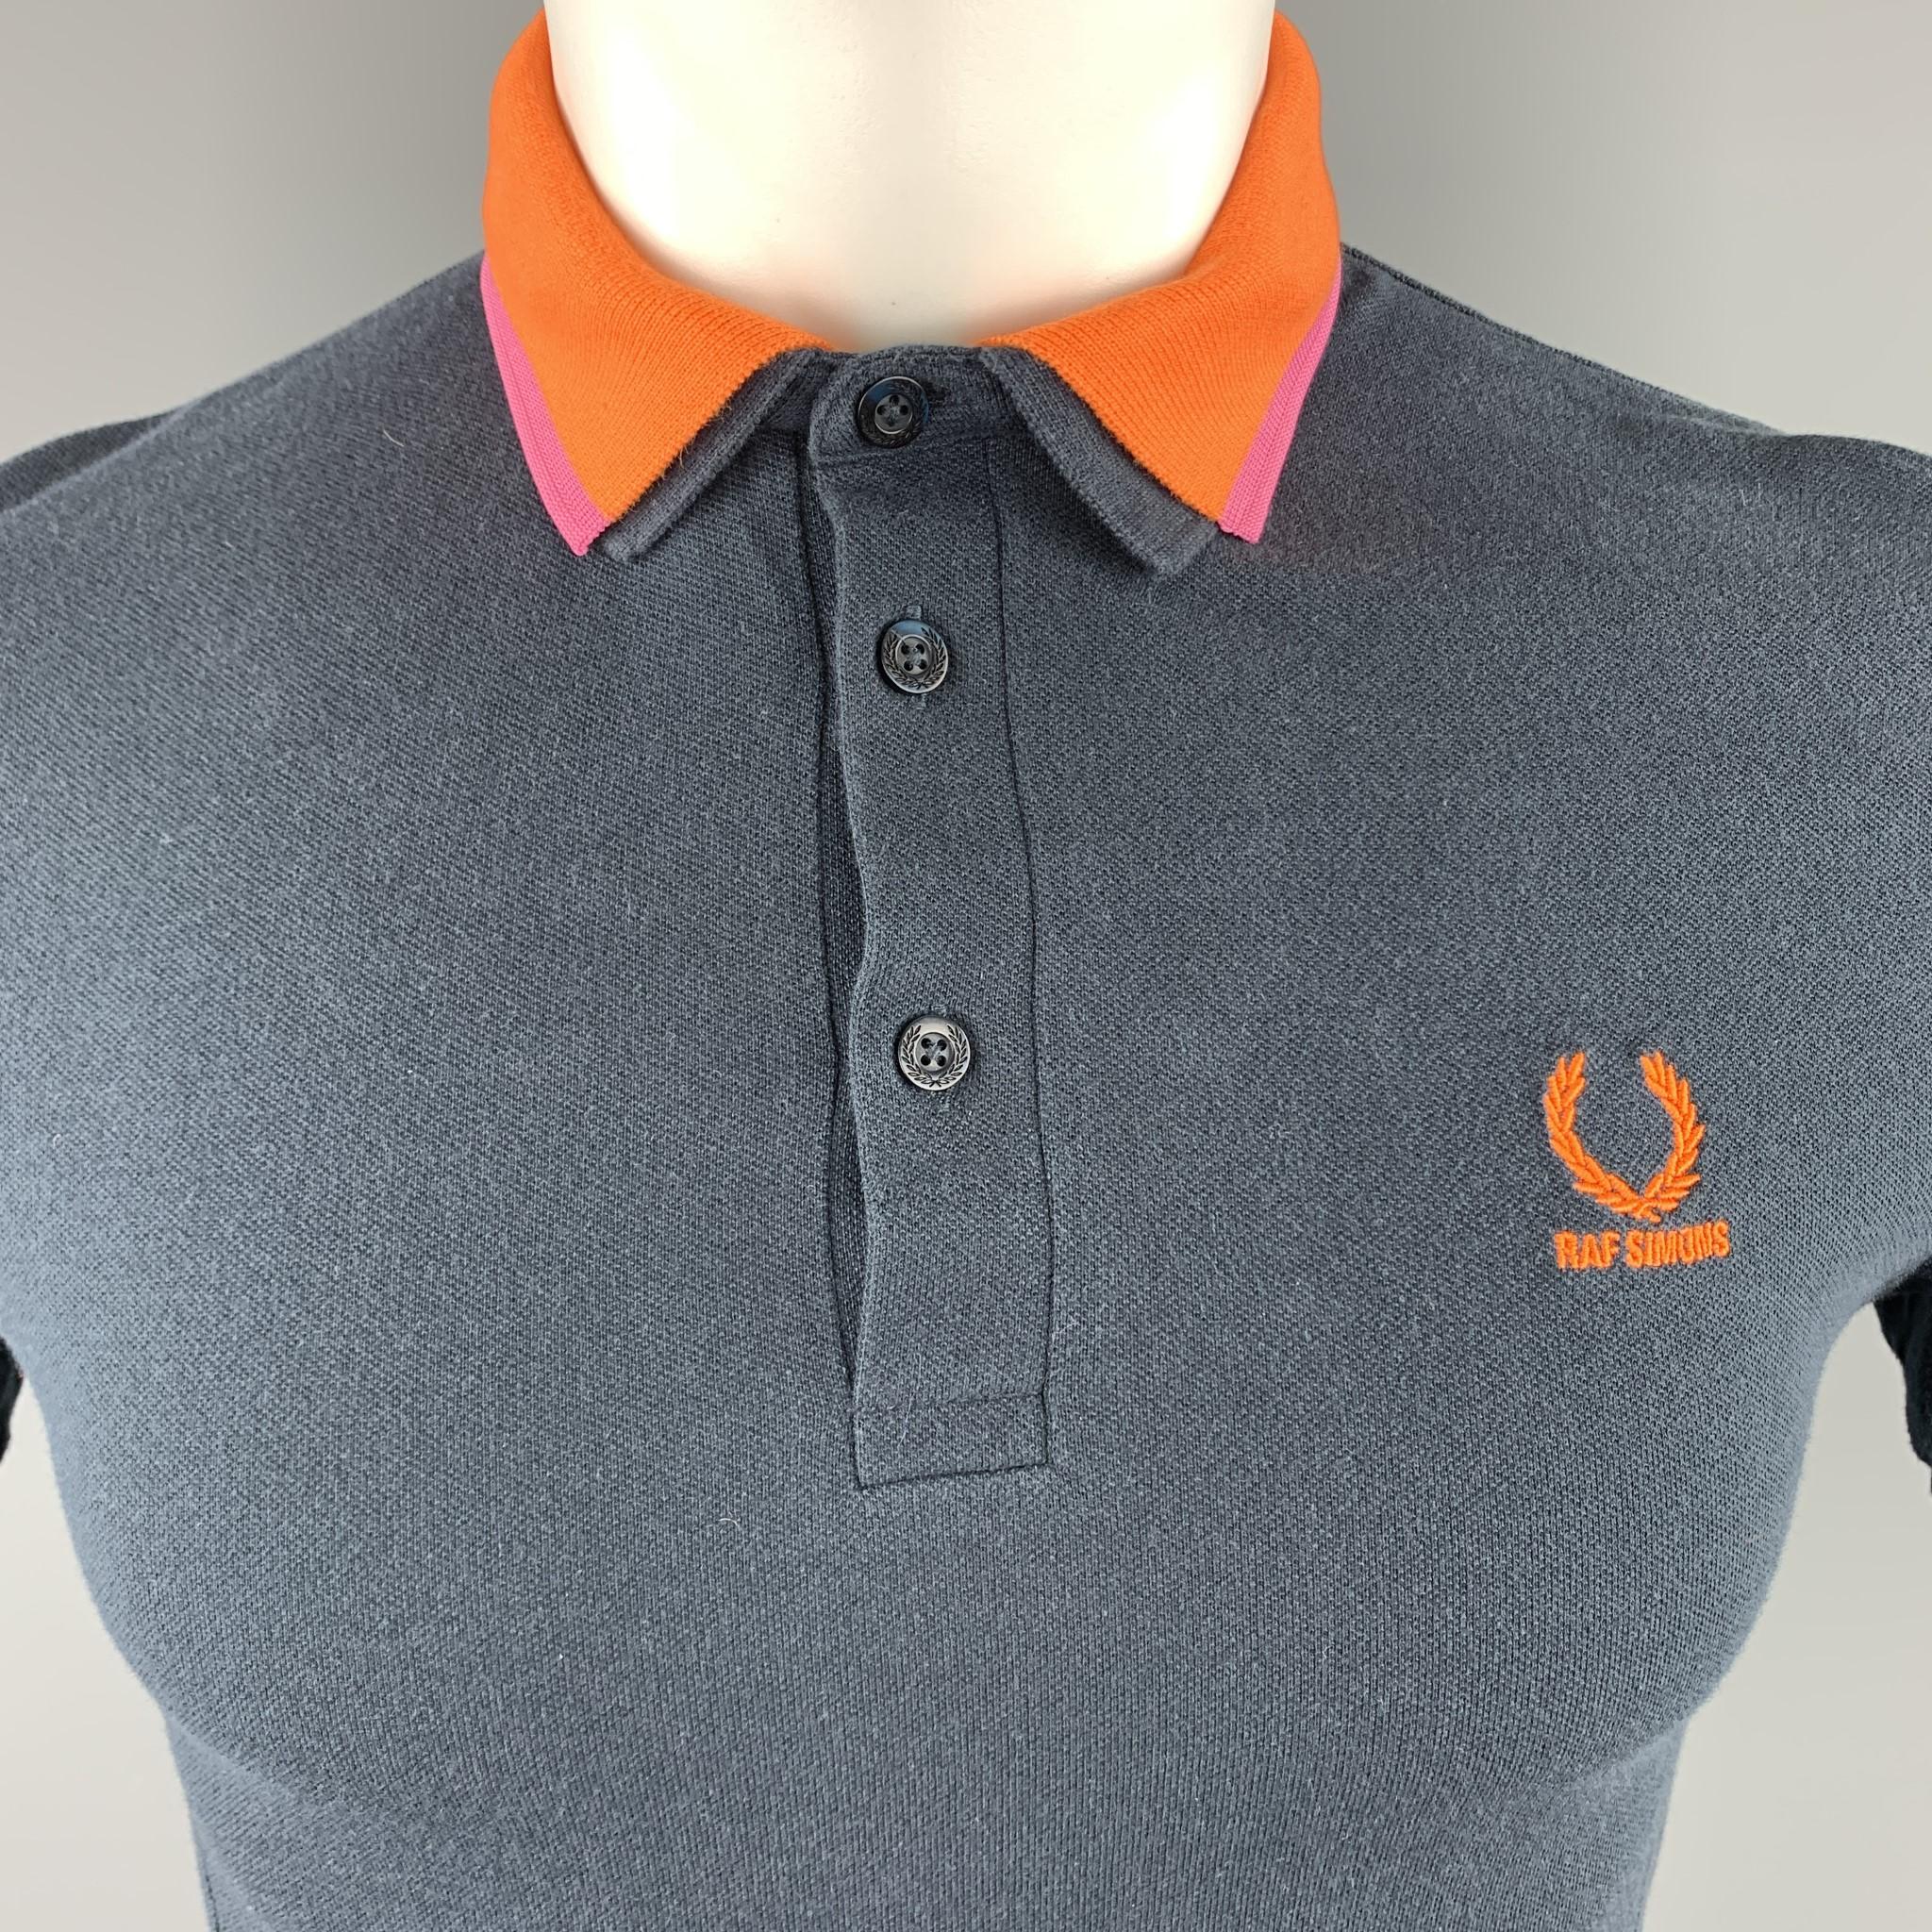 FRED PERRY x RAF SIMONS polo comes in navy cotton pique with an orange embroidered logo and detachable orange and pink striped collar. Made in Portugal.

Good Pre-Owned Condition.
Marked: US 36

Measurements:

Shoulder: 16.5 in.
Chest: 36